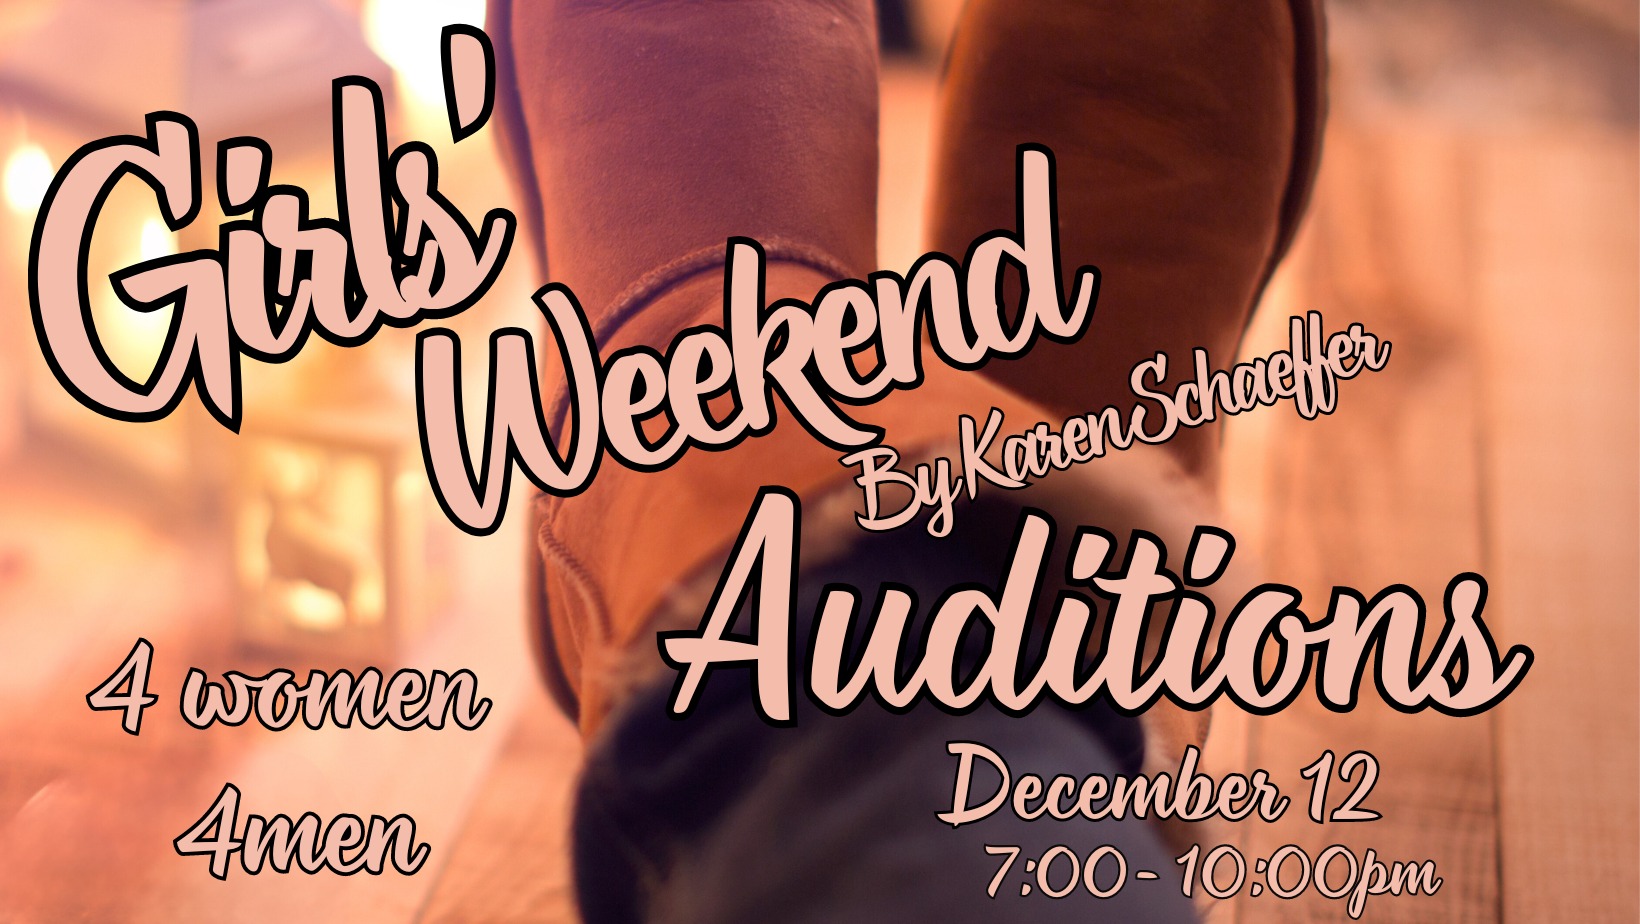 CTX3531. Auditions for Girls' Weekend, by Theatre Victoria